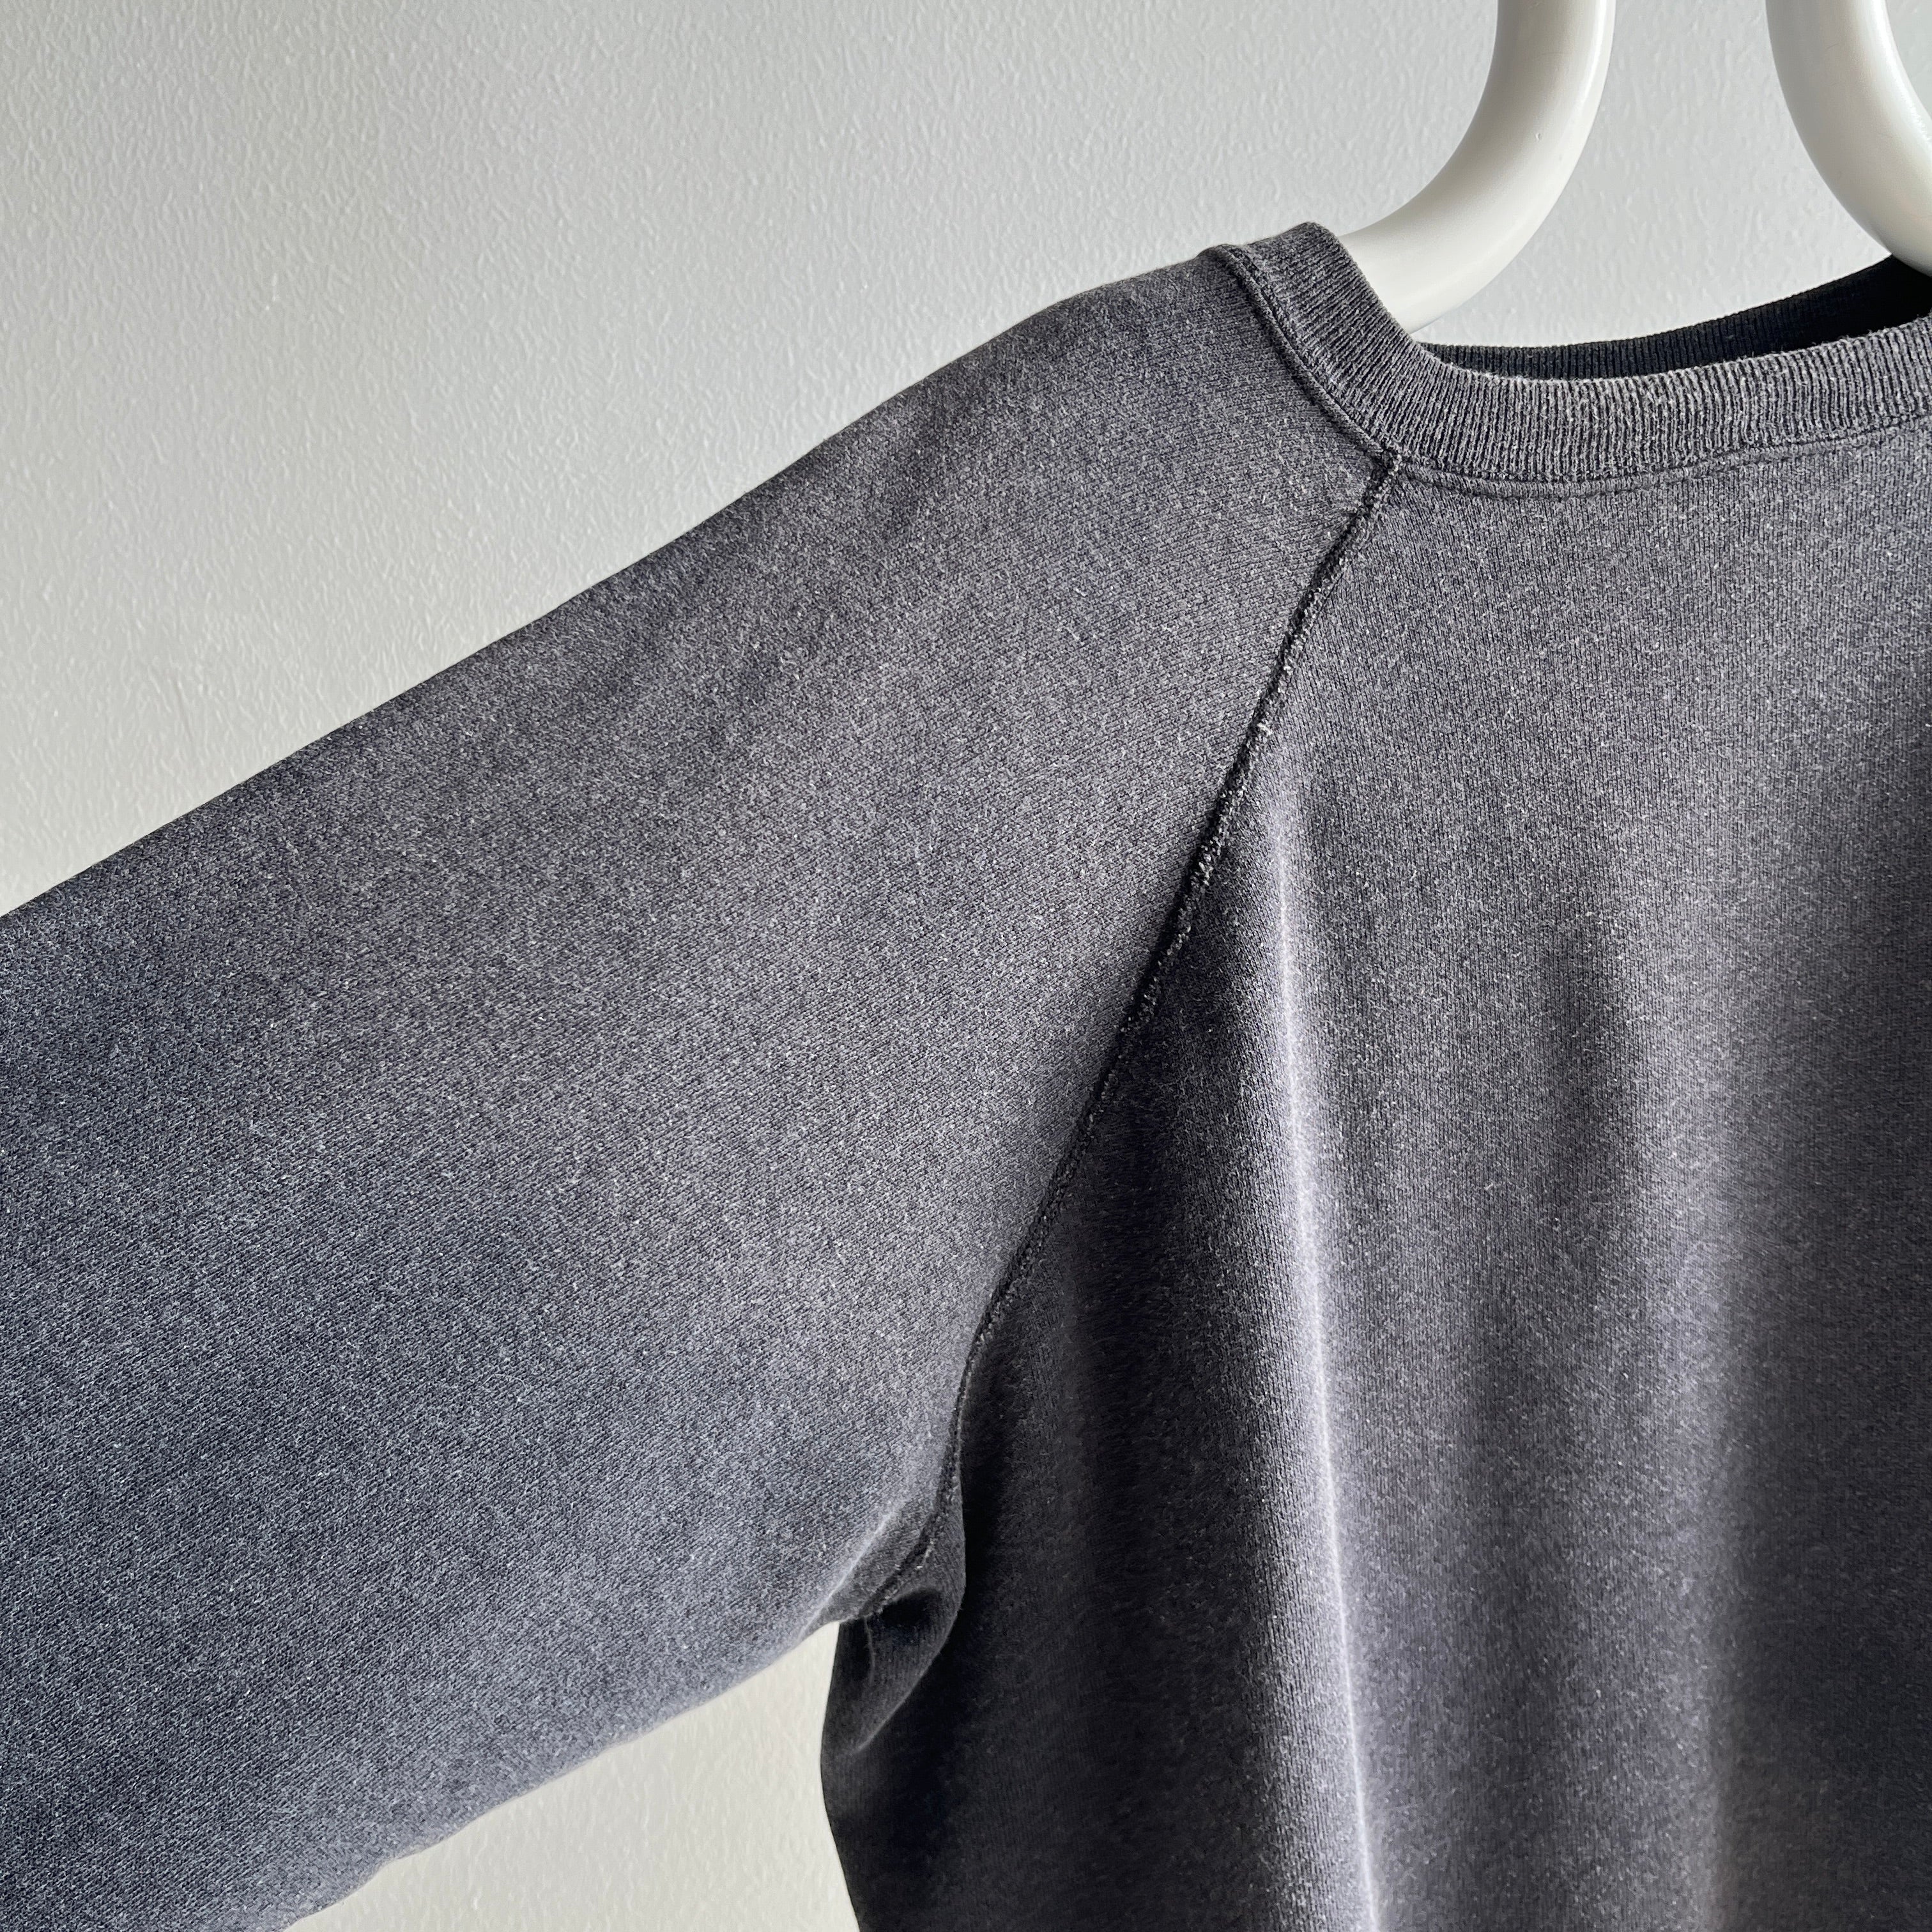 1980s Soft, Slouchy, Luxurious, Stained (but cool) Faded Black/Gray Sweatshirt